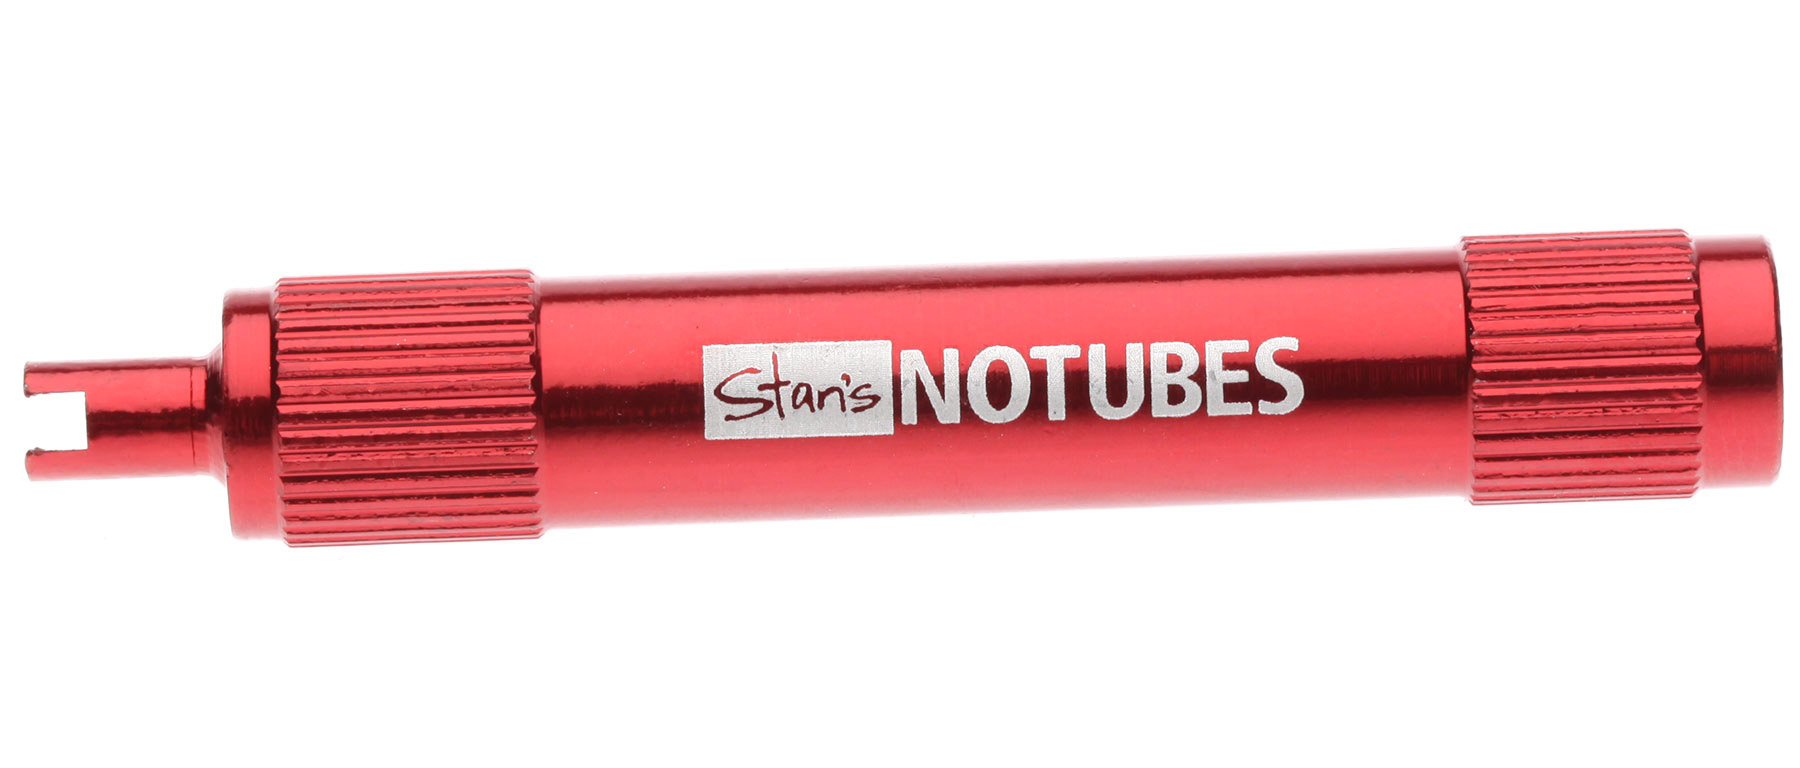 Stans NoTubes Valve Core Remover